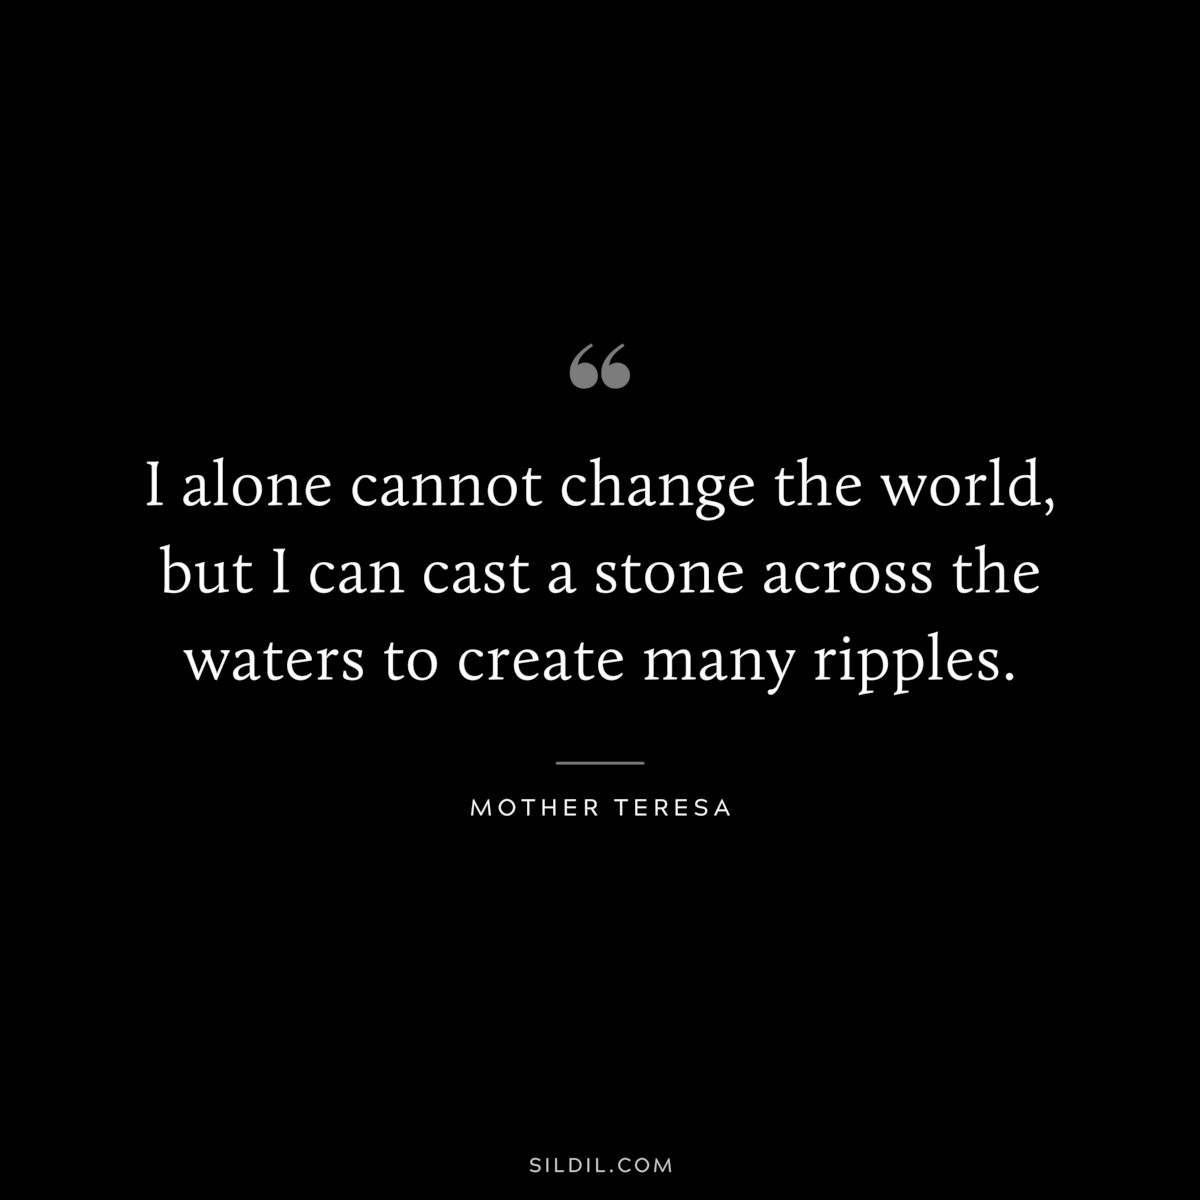 I alone cannot change the world, but I can cast a stone across the waters to create many ripples. ― Mother Teresa